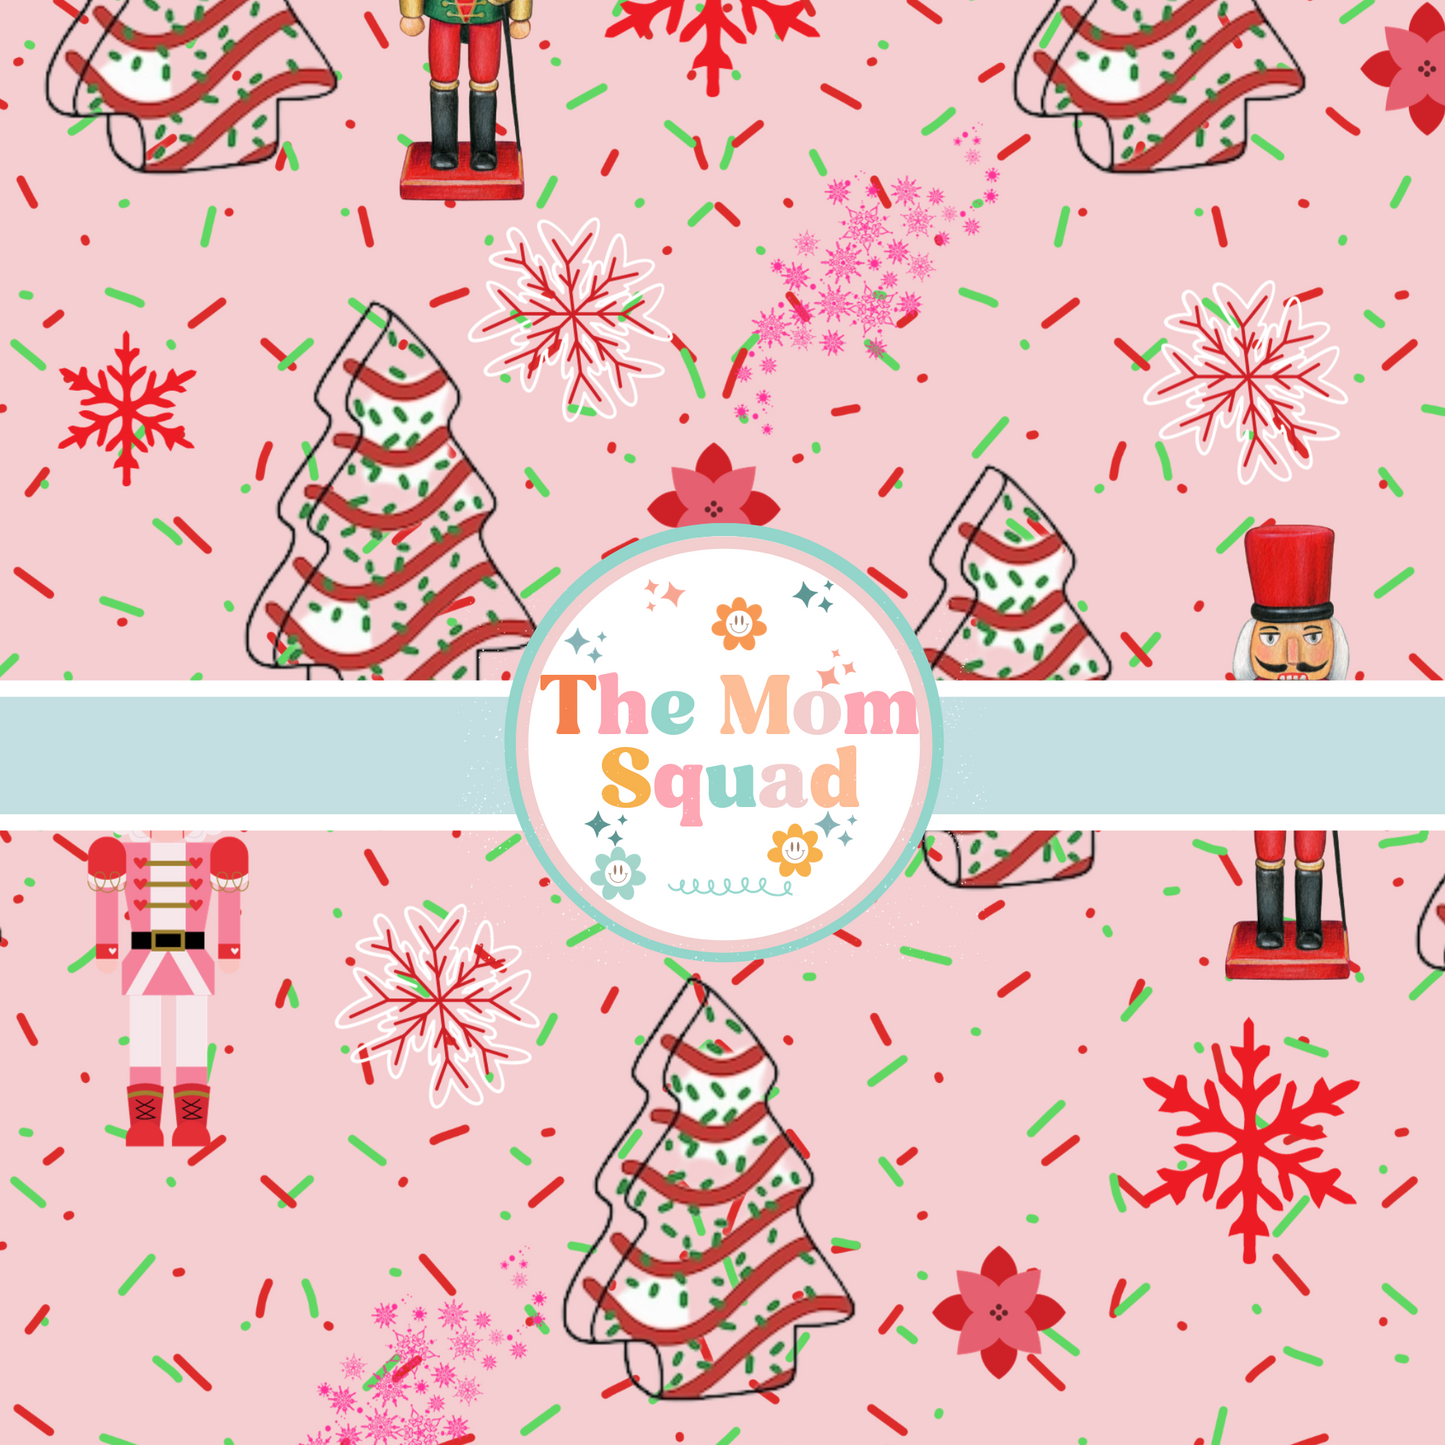 Christmas Debbie Cake Nutcracker: Festive Pink Seamless Pattern for Holiday Delight with a Whimsical Touch